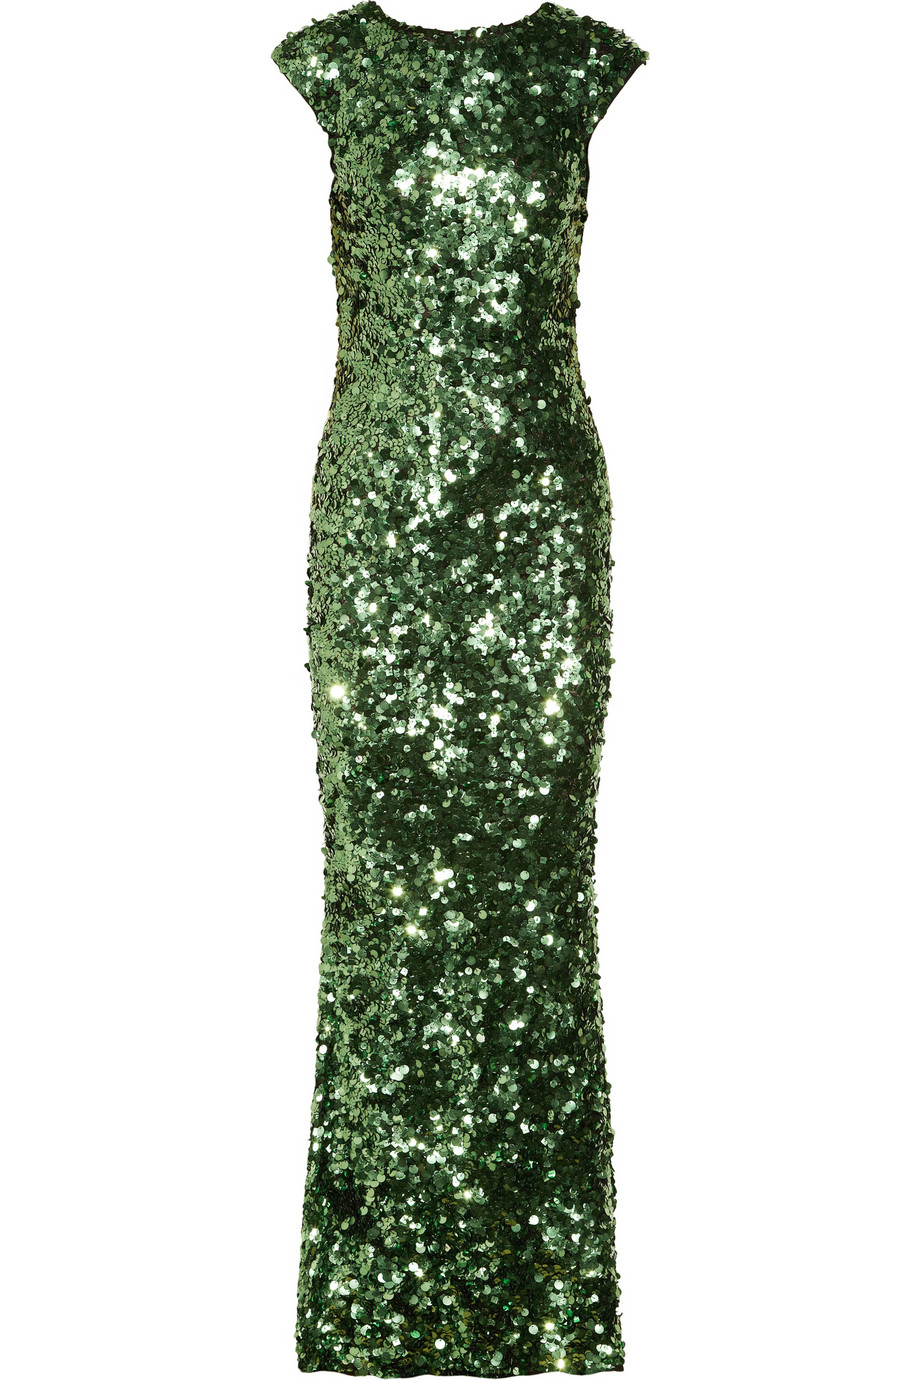 Lyst - Alice + Olivia Gigi Sequined Gown in Green